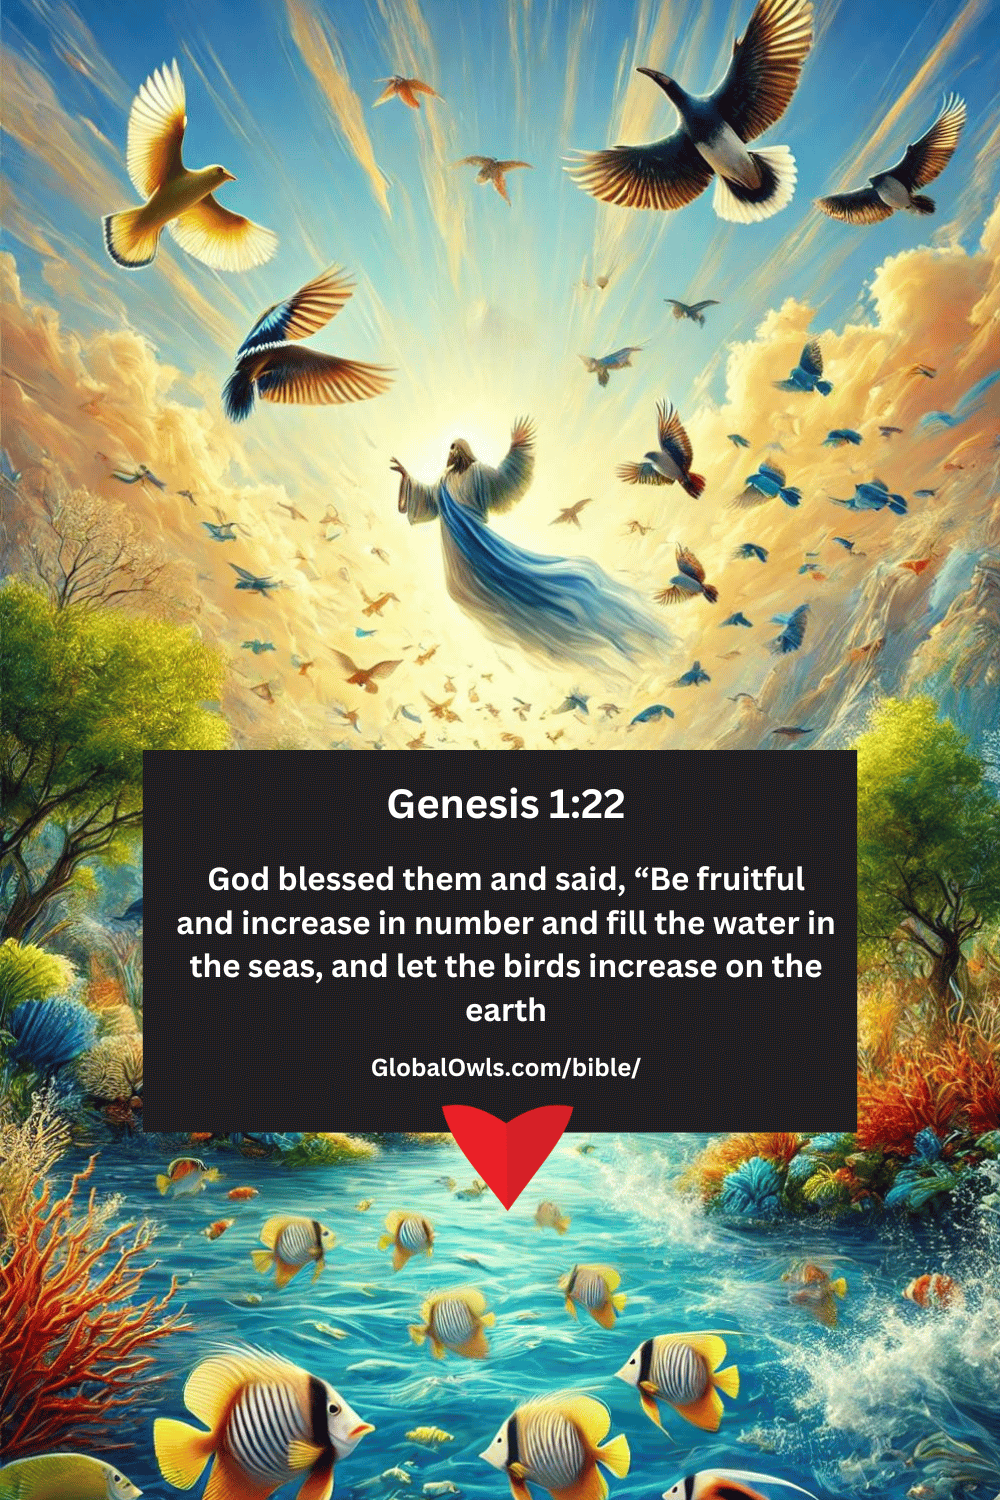 Genesis 1-22 God blessed them and said, “Be fruitful and increase in number and fill the water in the seas, and let the birds increase on the earth